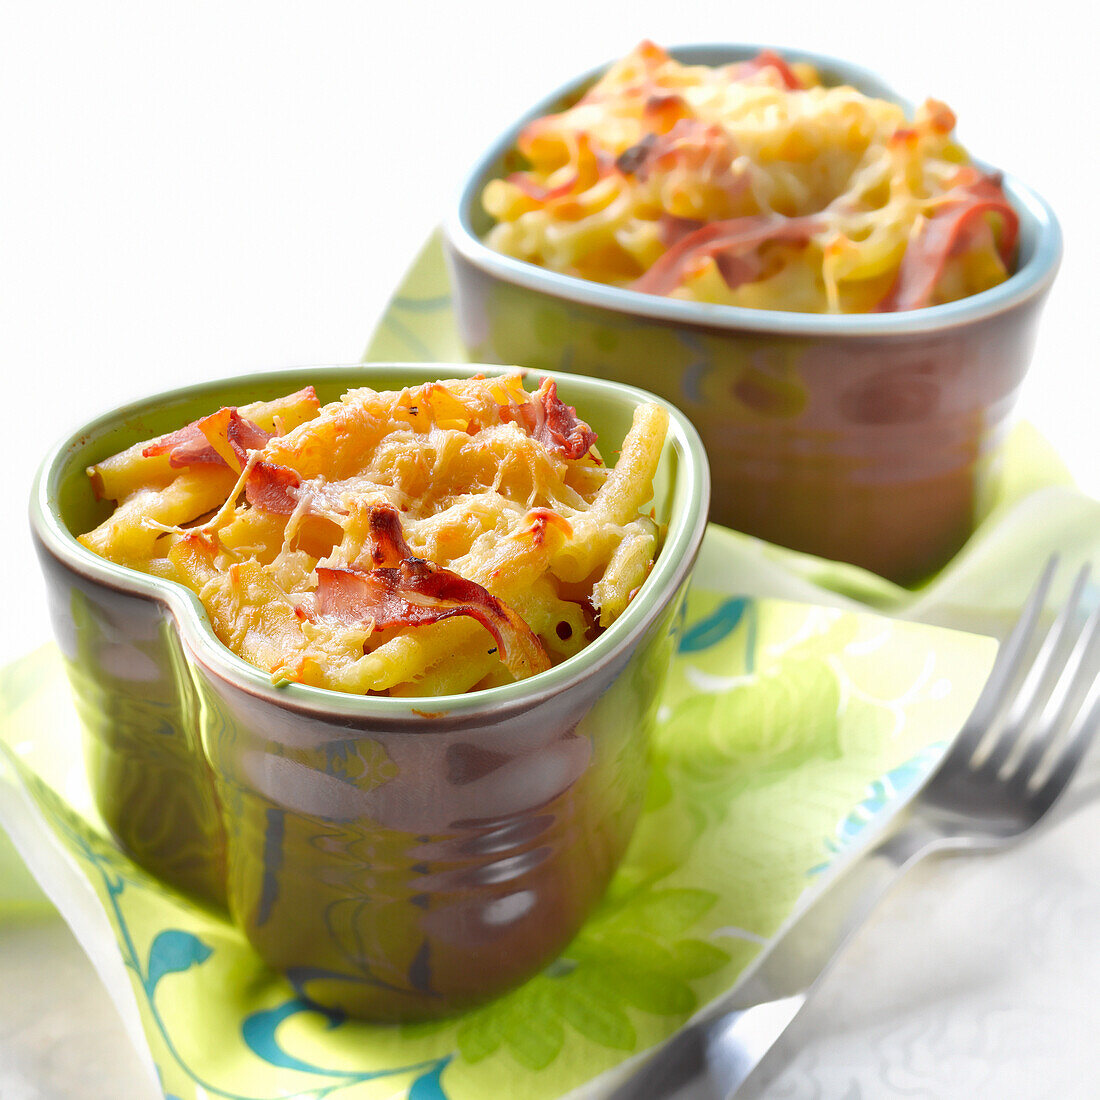 Macaronis and Parma ham cheese-topped dish